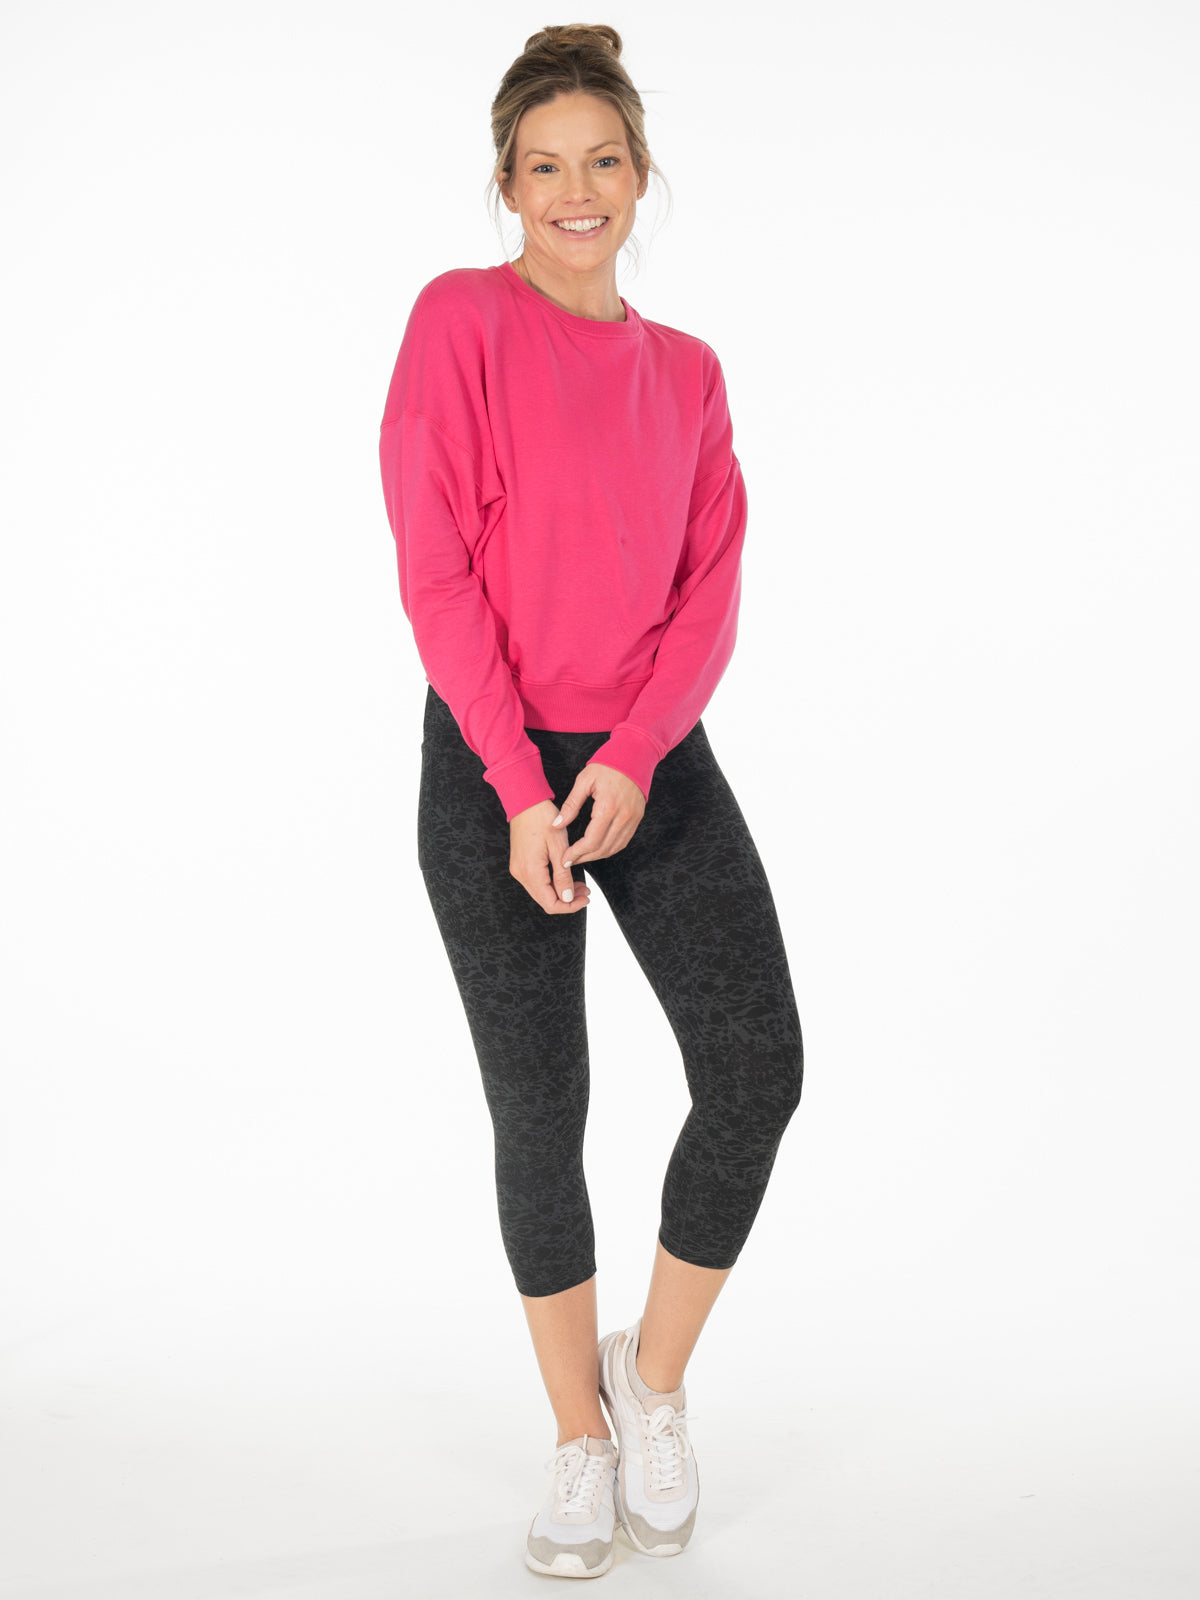 Women's Buttery Soft Activewear Leggings (XS only) - Wholesale